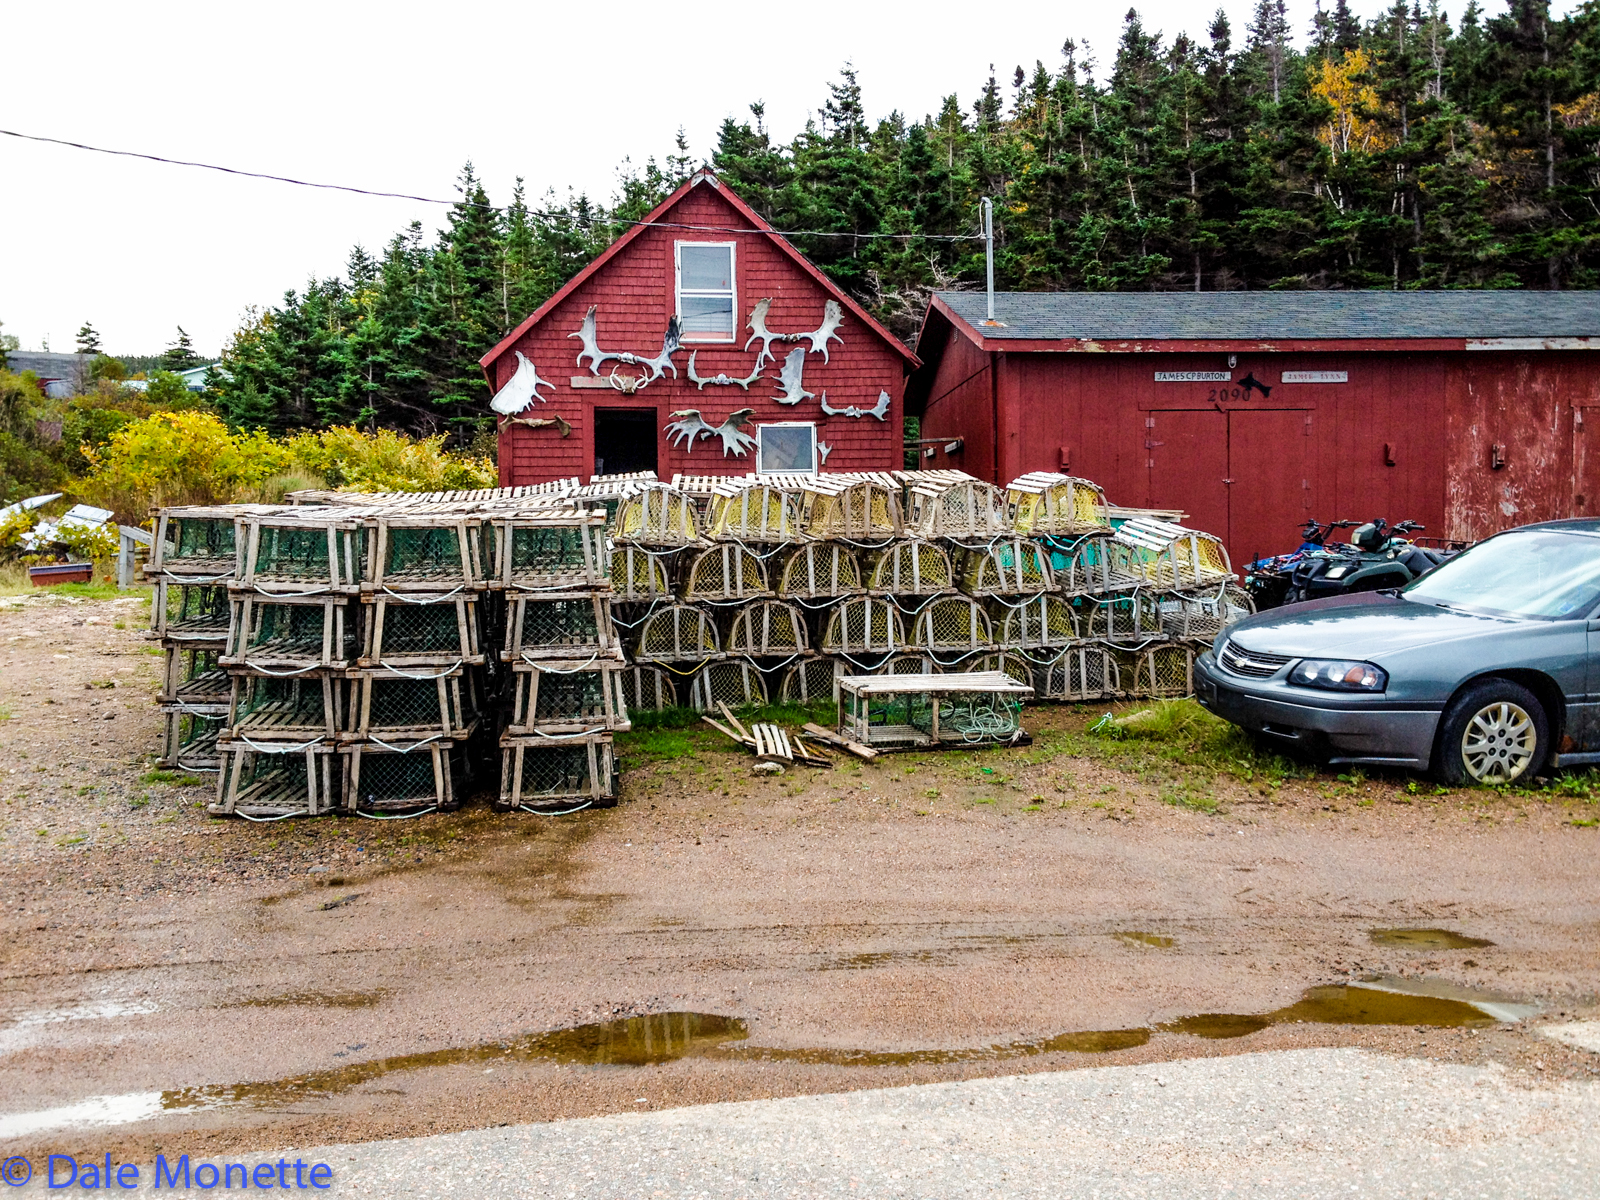   Lobster season in the small fishing village of White Point. By the looks of the barn its this guy hunts&nbsp;moose antlers laying on the ground in the off season.  